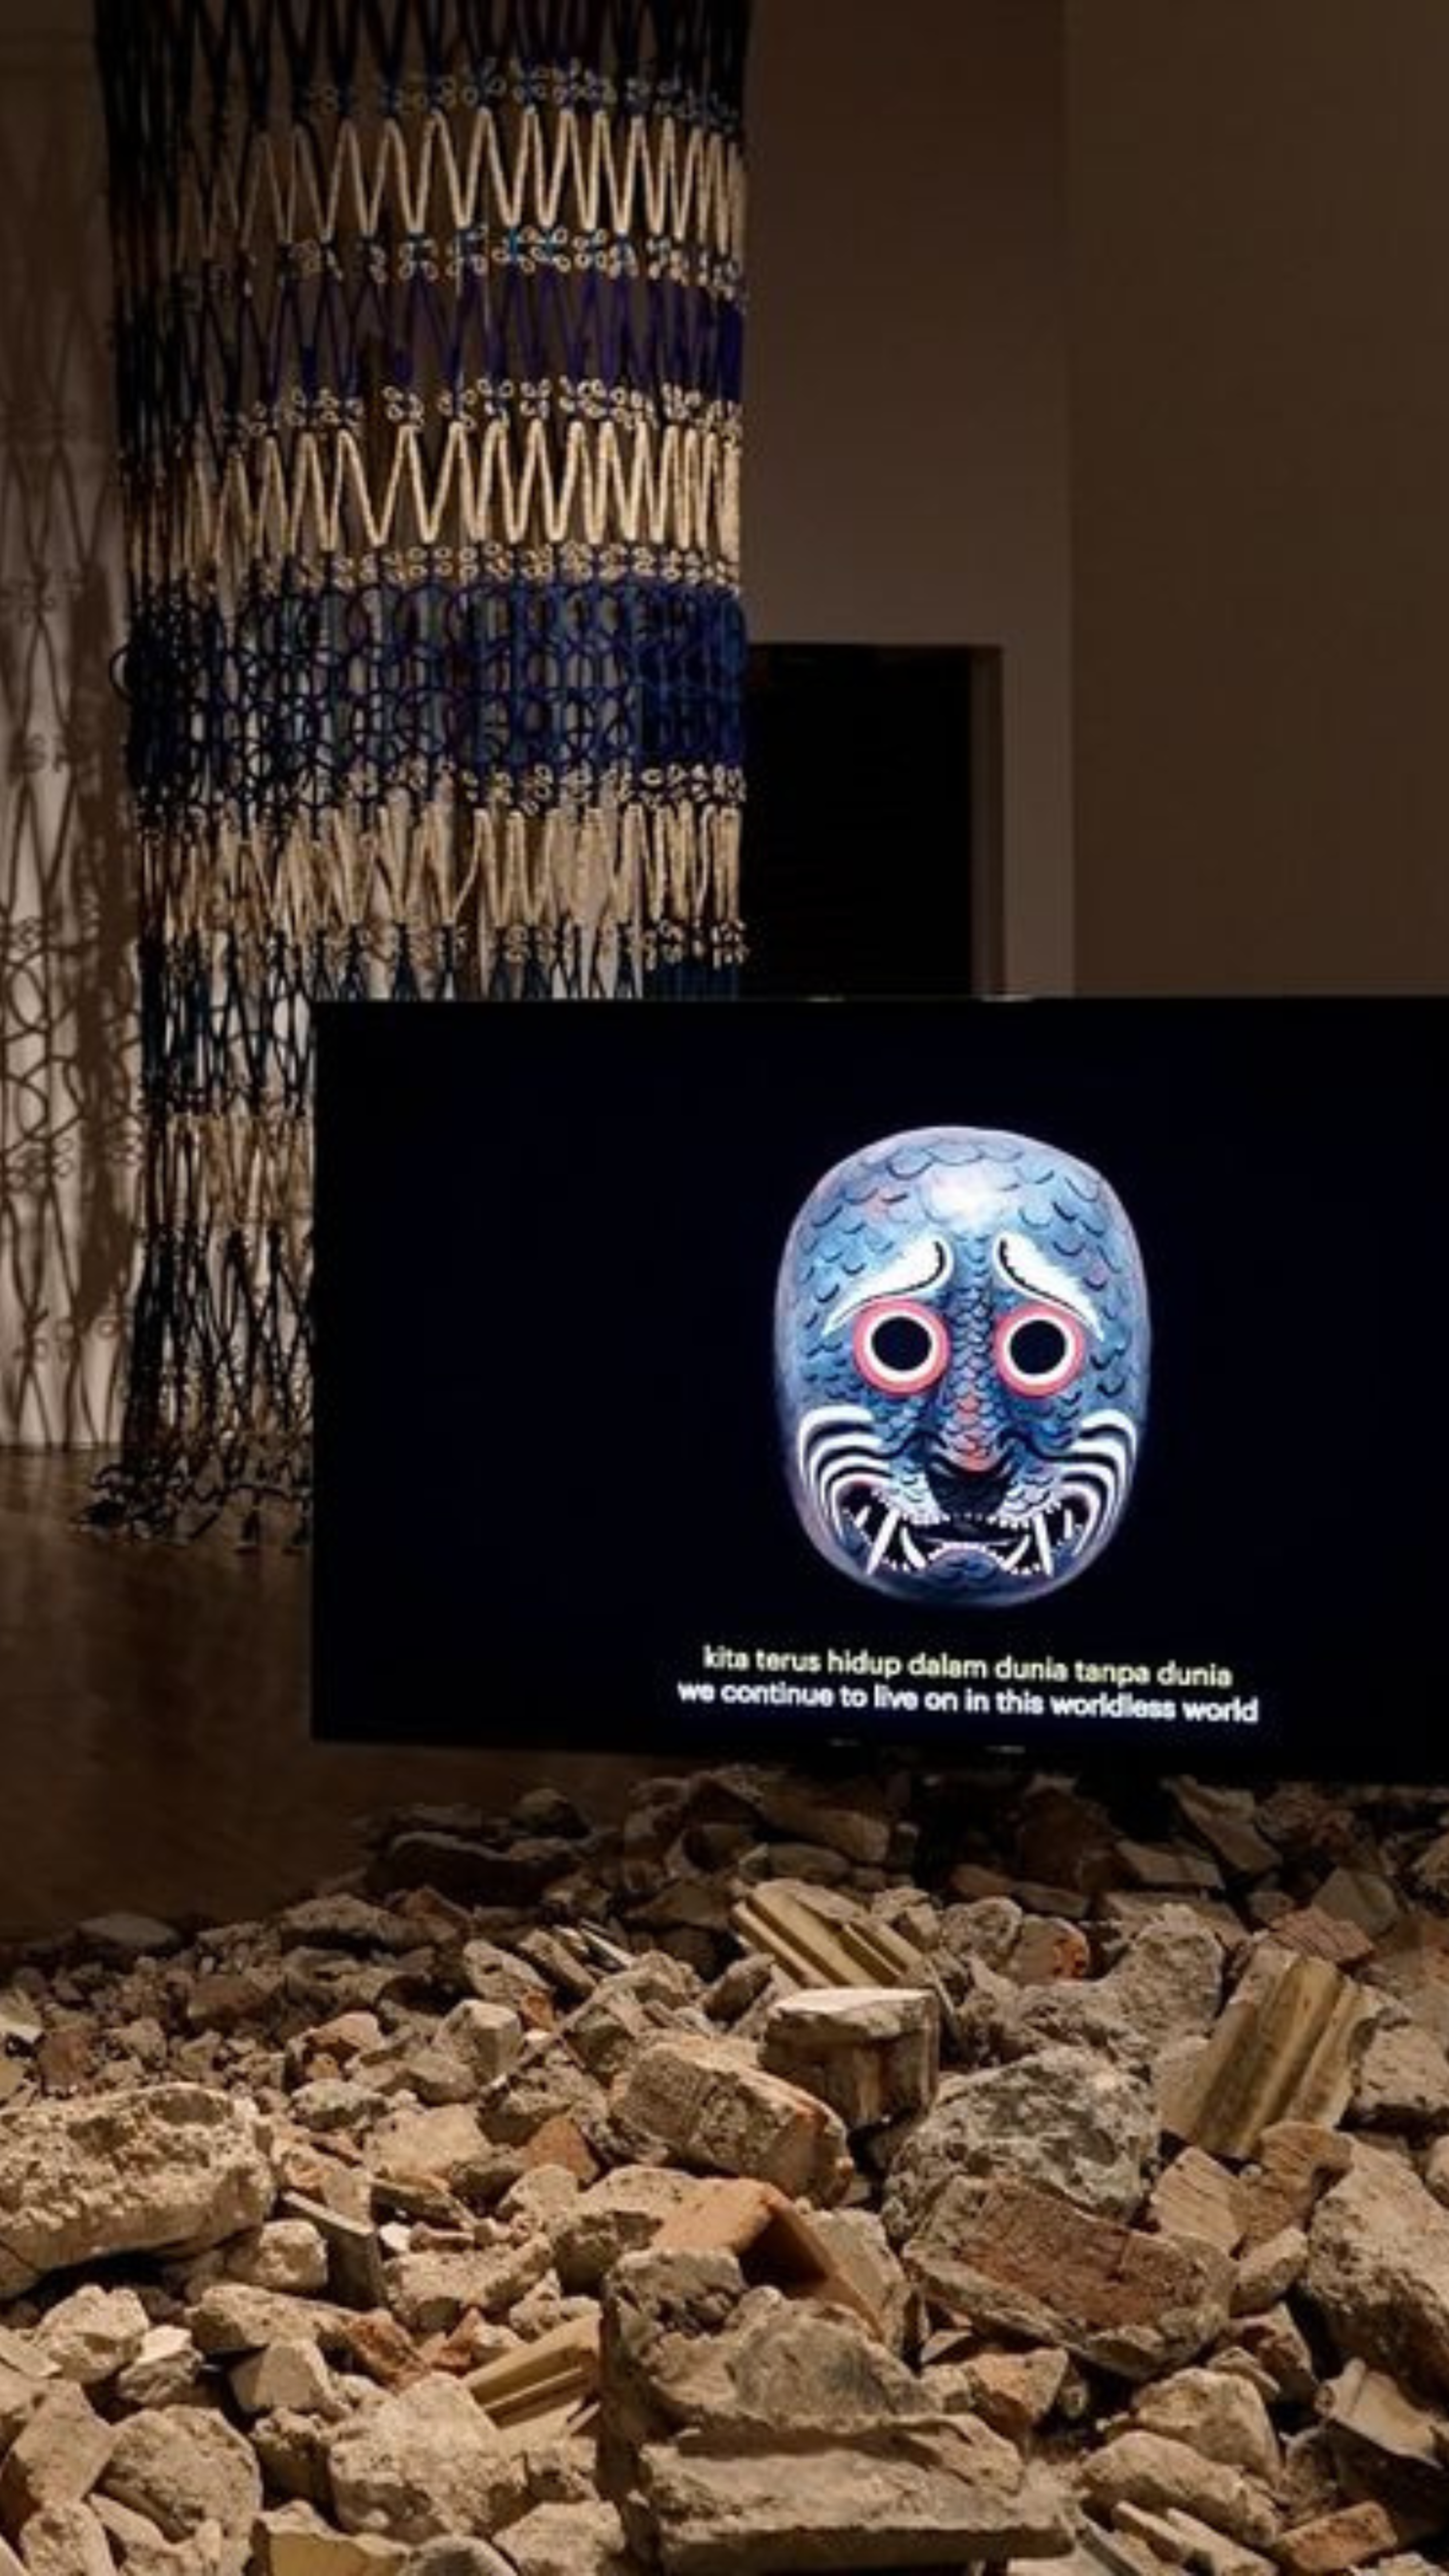 An art installation featuring a decorated mask on a screen above rubble, with an Indonesian phrase and its English translation displayed.